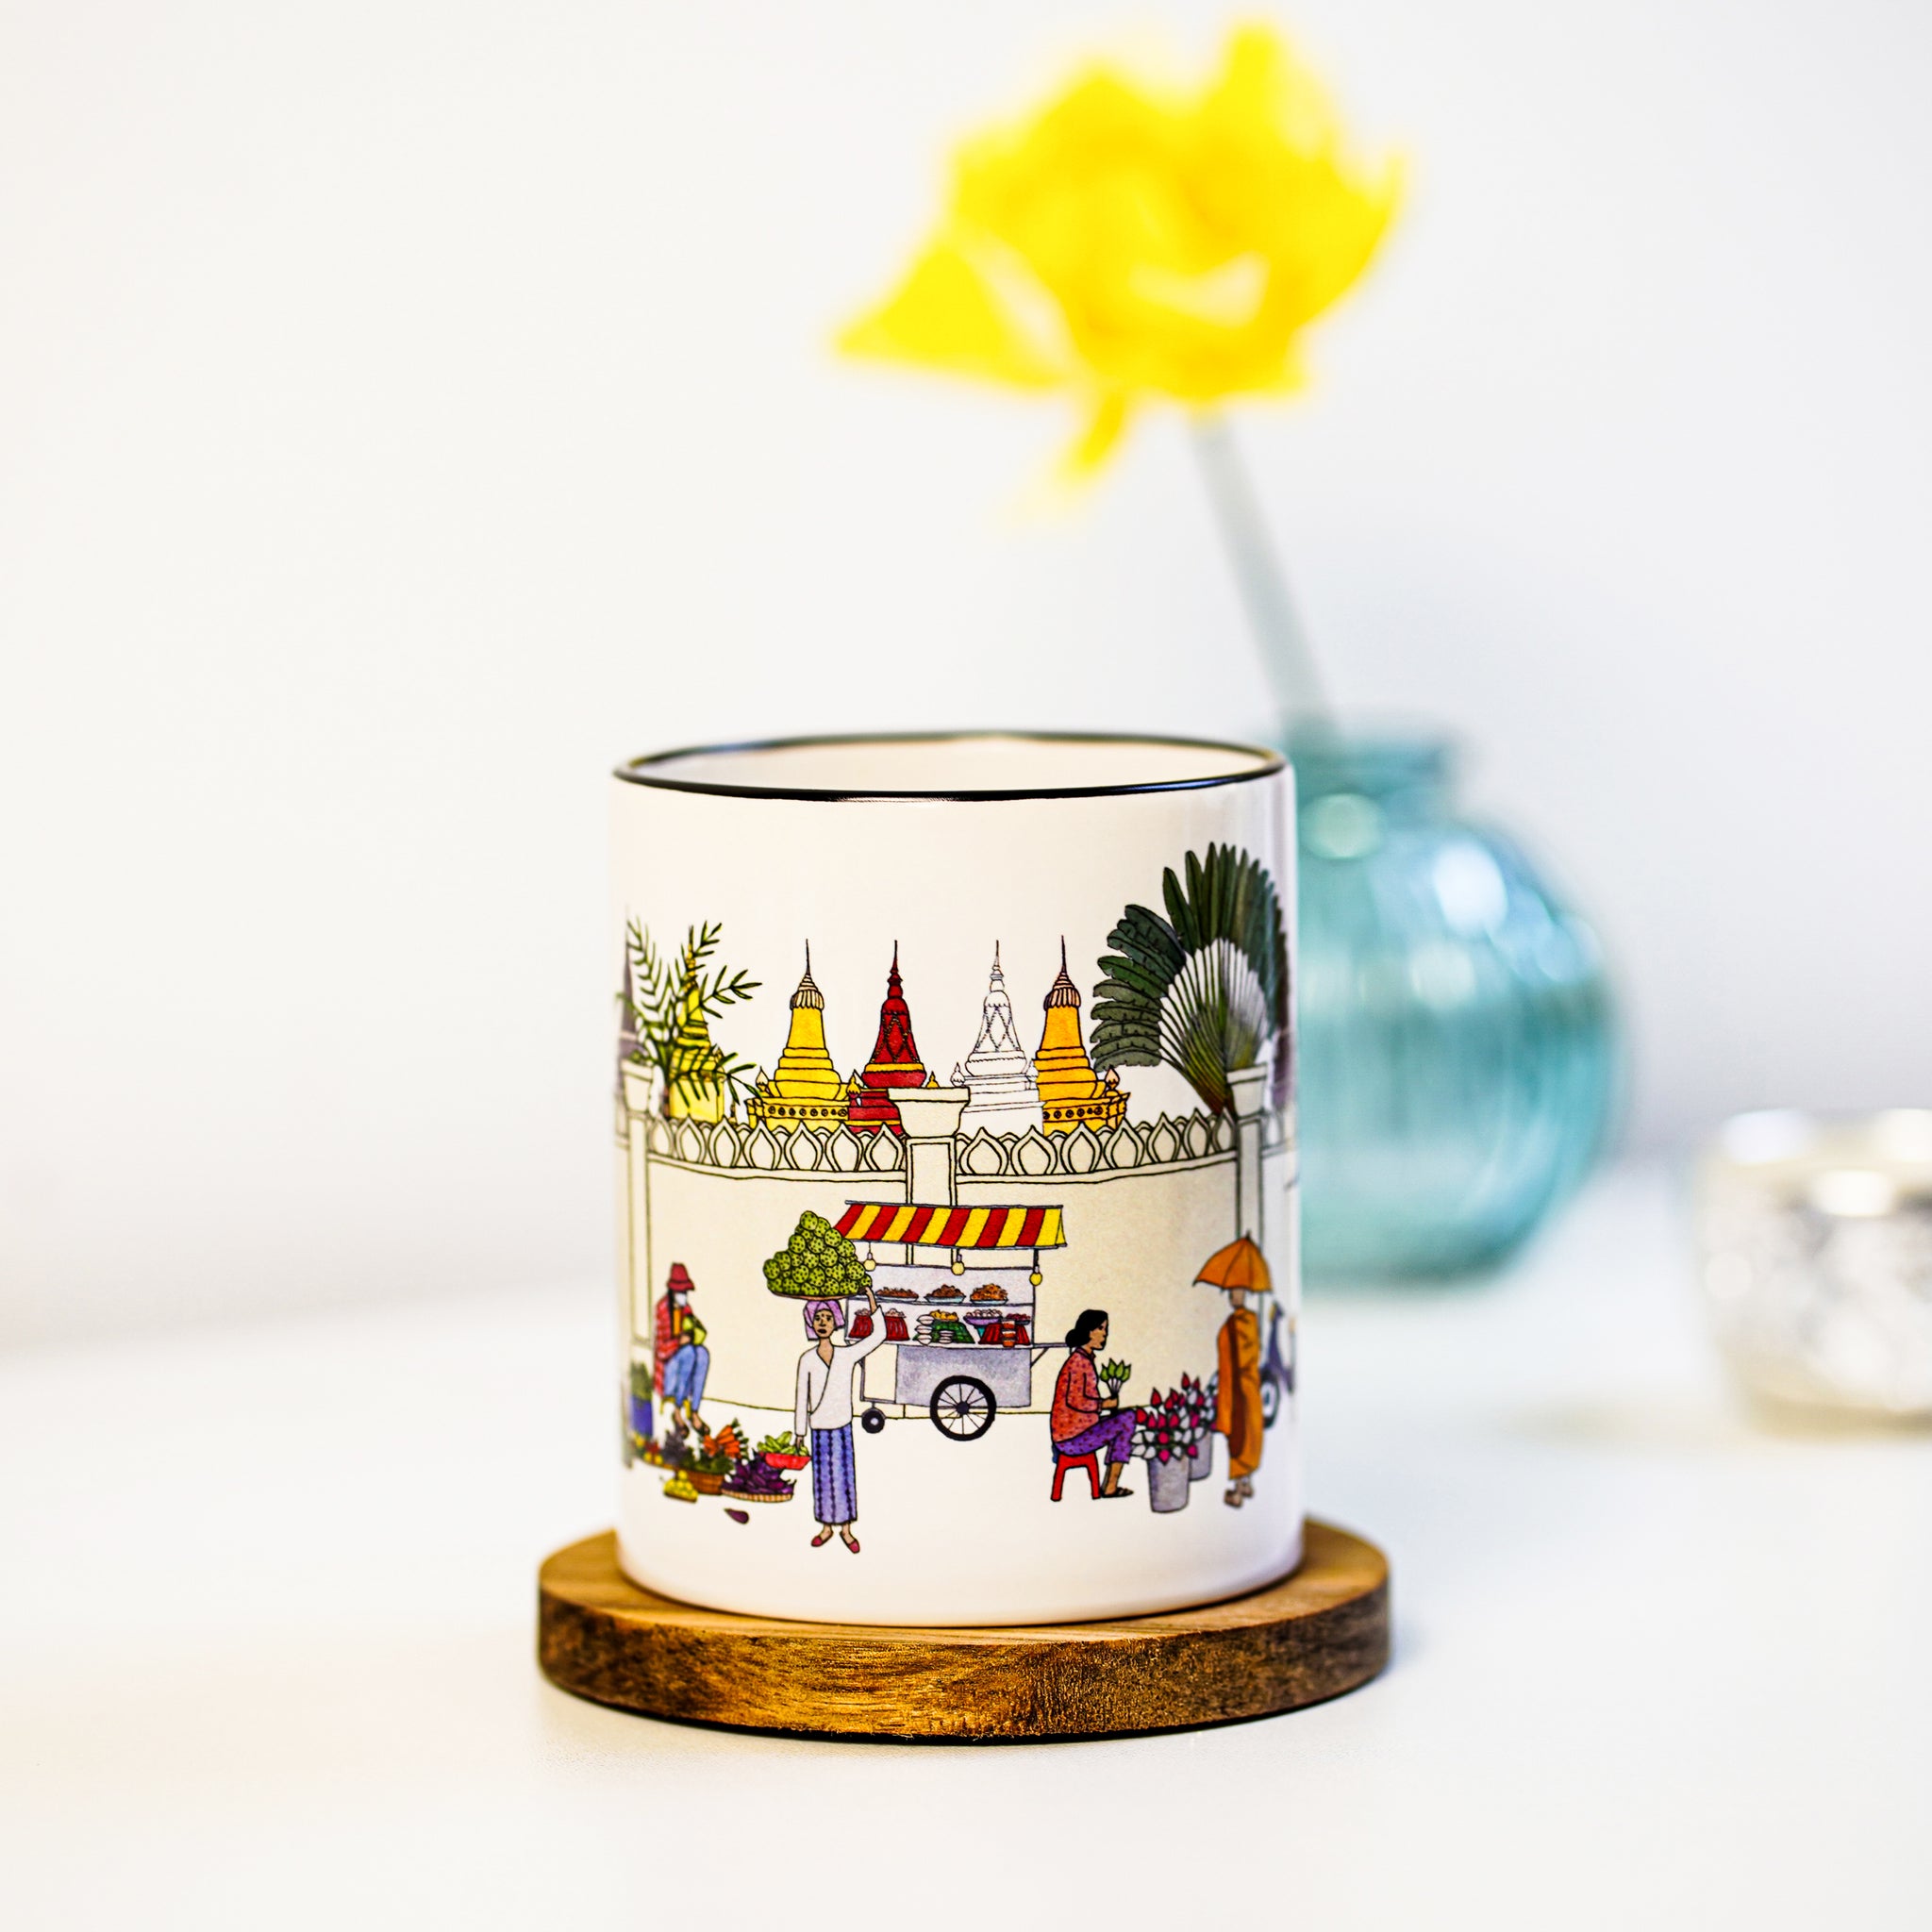 Eye-catching illustrated mug that handles your cold or hot beverage in style. This mug features an illustration that depicts everyday life in Cambodia's capital, Phnom Penh. Its rainbow-colored theme is to bring joy into your day. A perfect gift to oneself or loved ones.